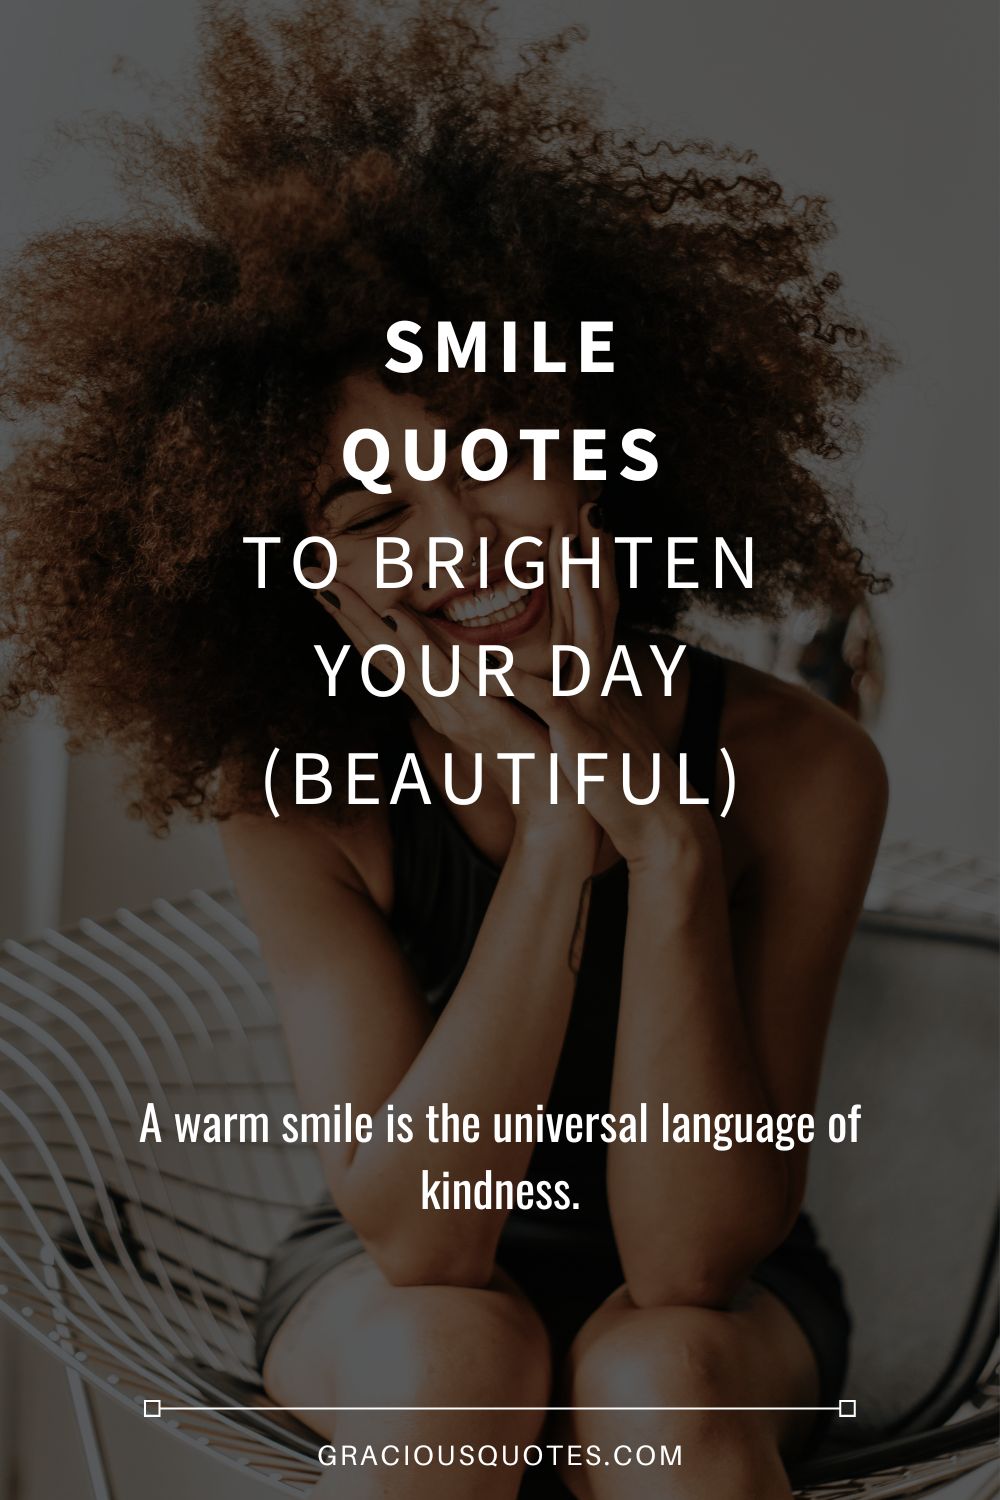 Smile Quotes to Brighten Your Day (BEAUTIFUL) - Gracious Quotes